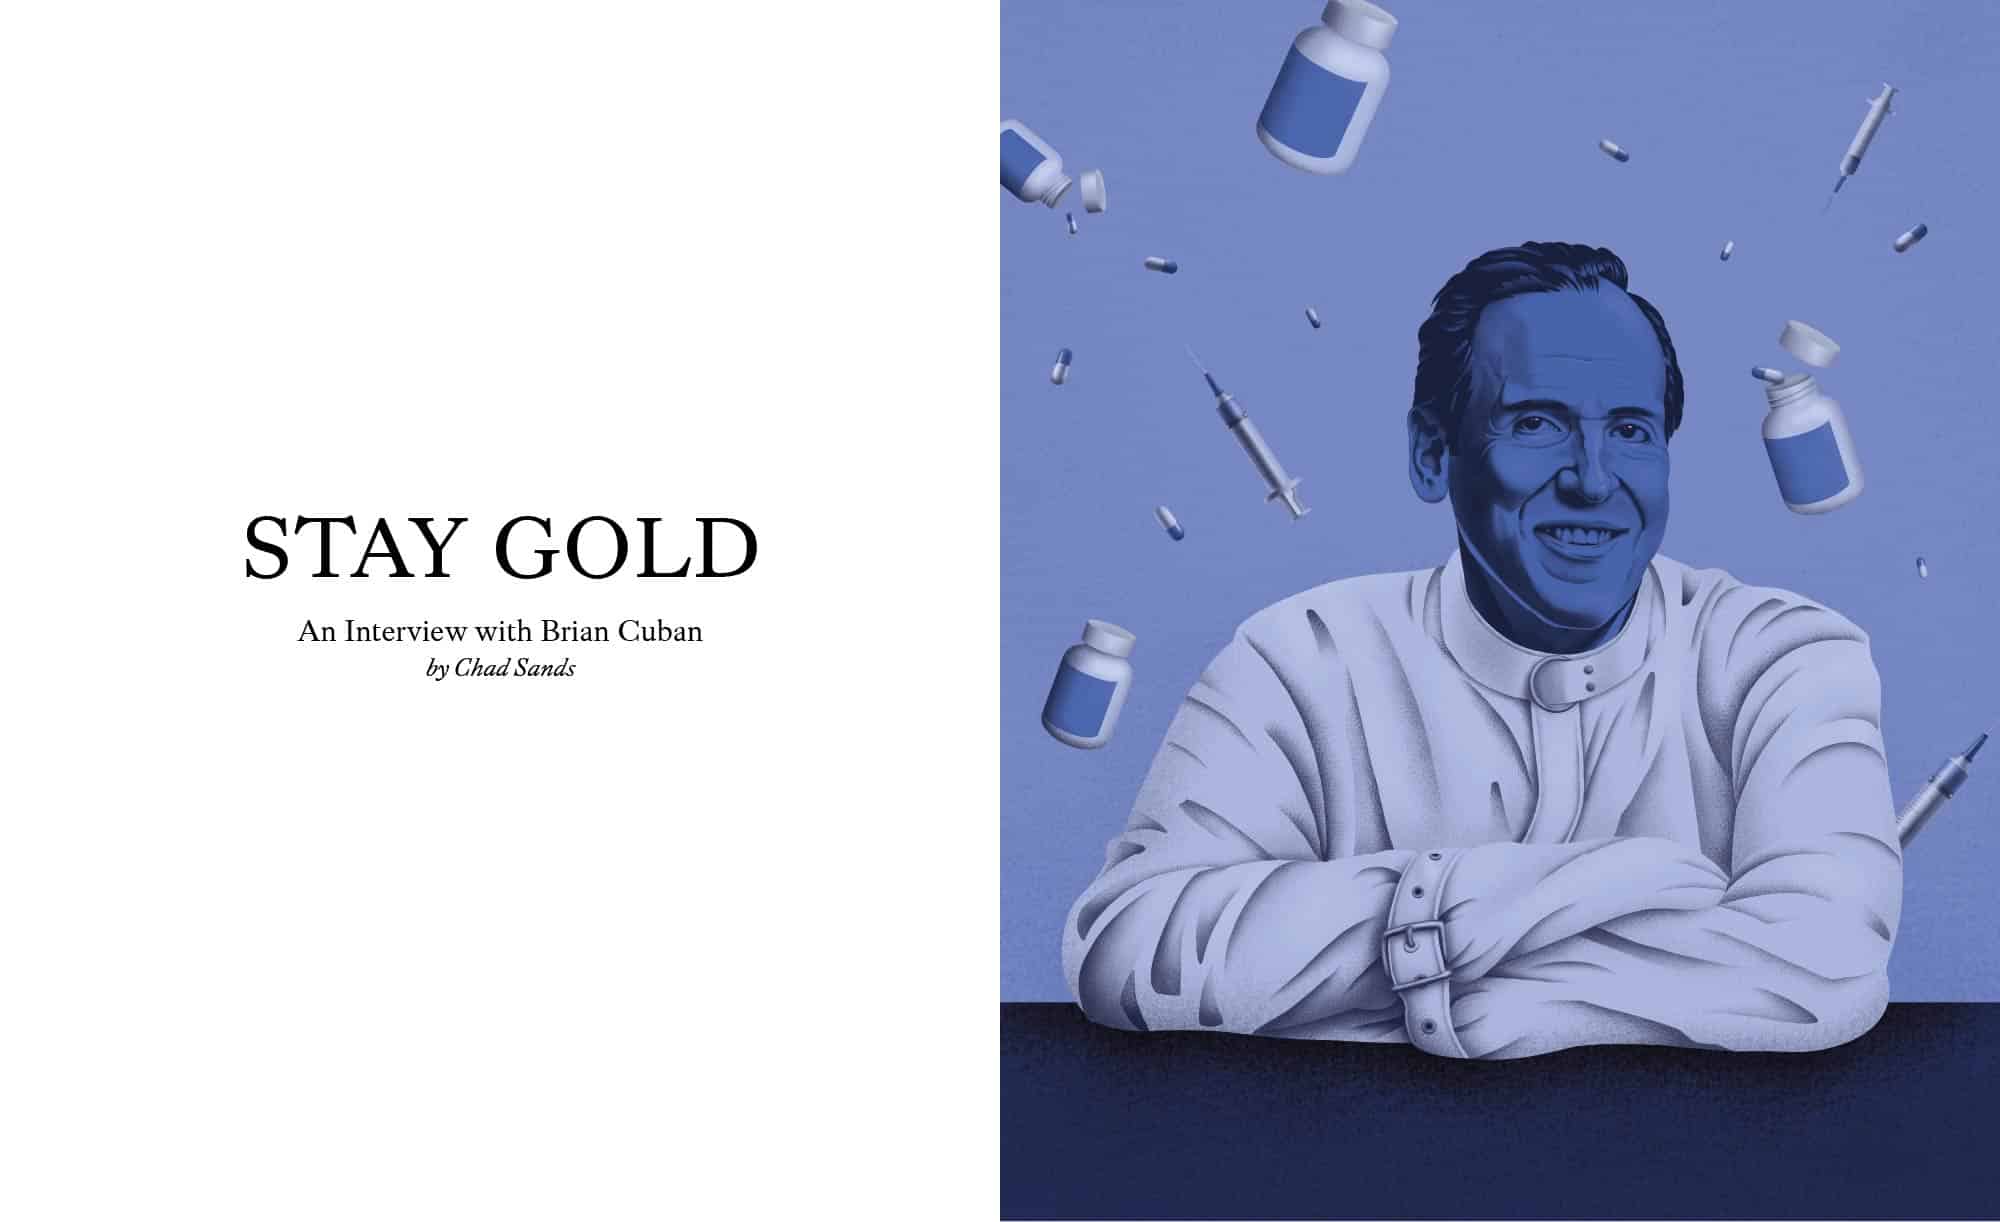 Stay Gold: An Interview with Brian Cuban by Chad Sands